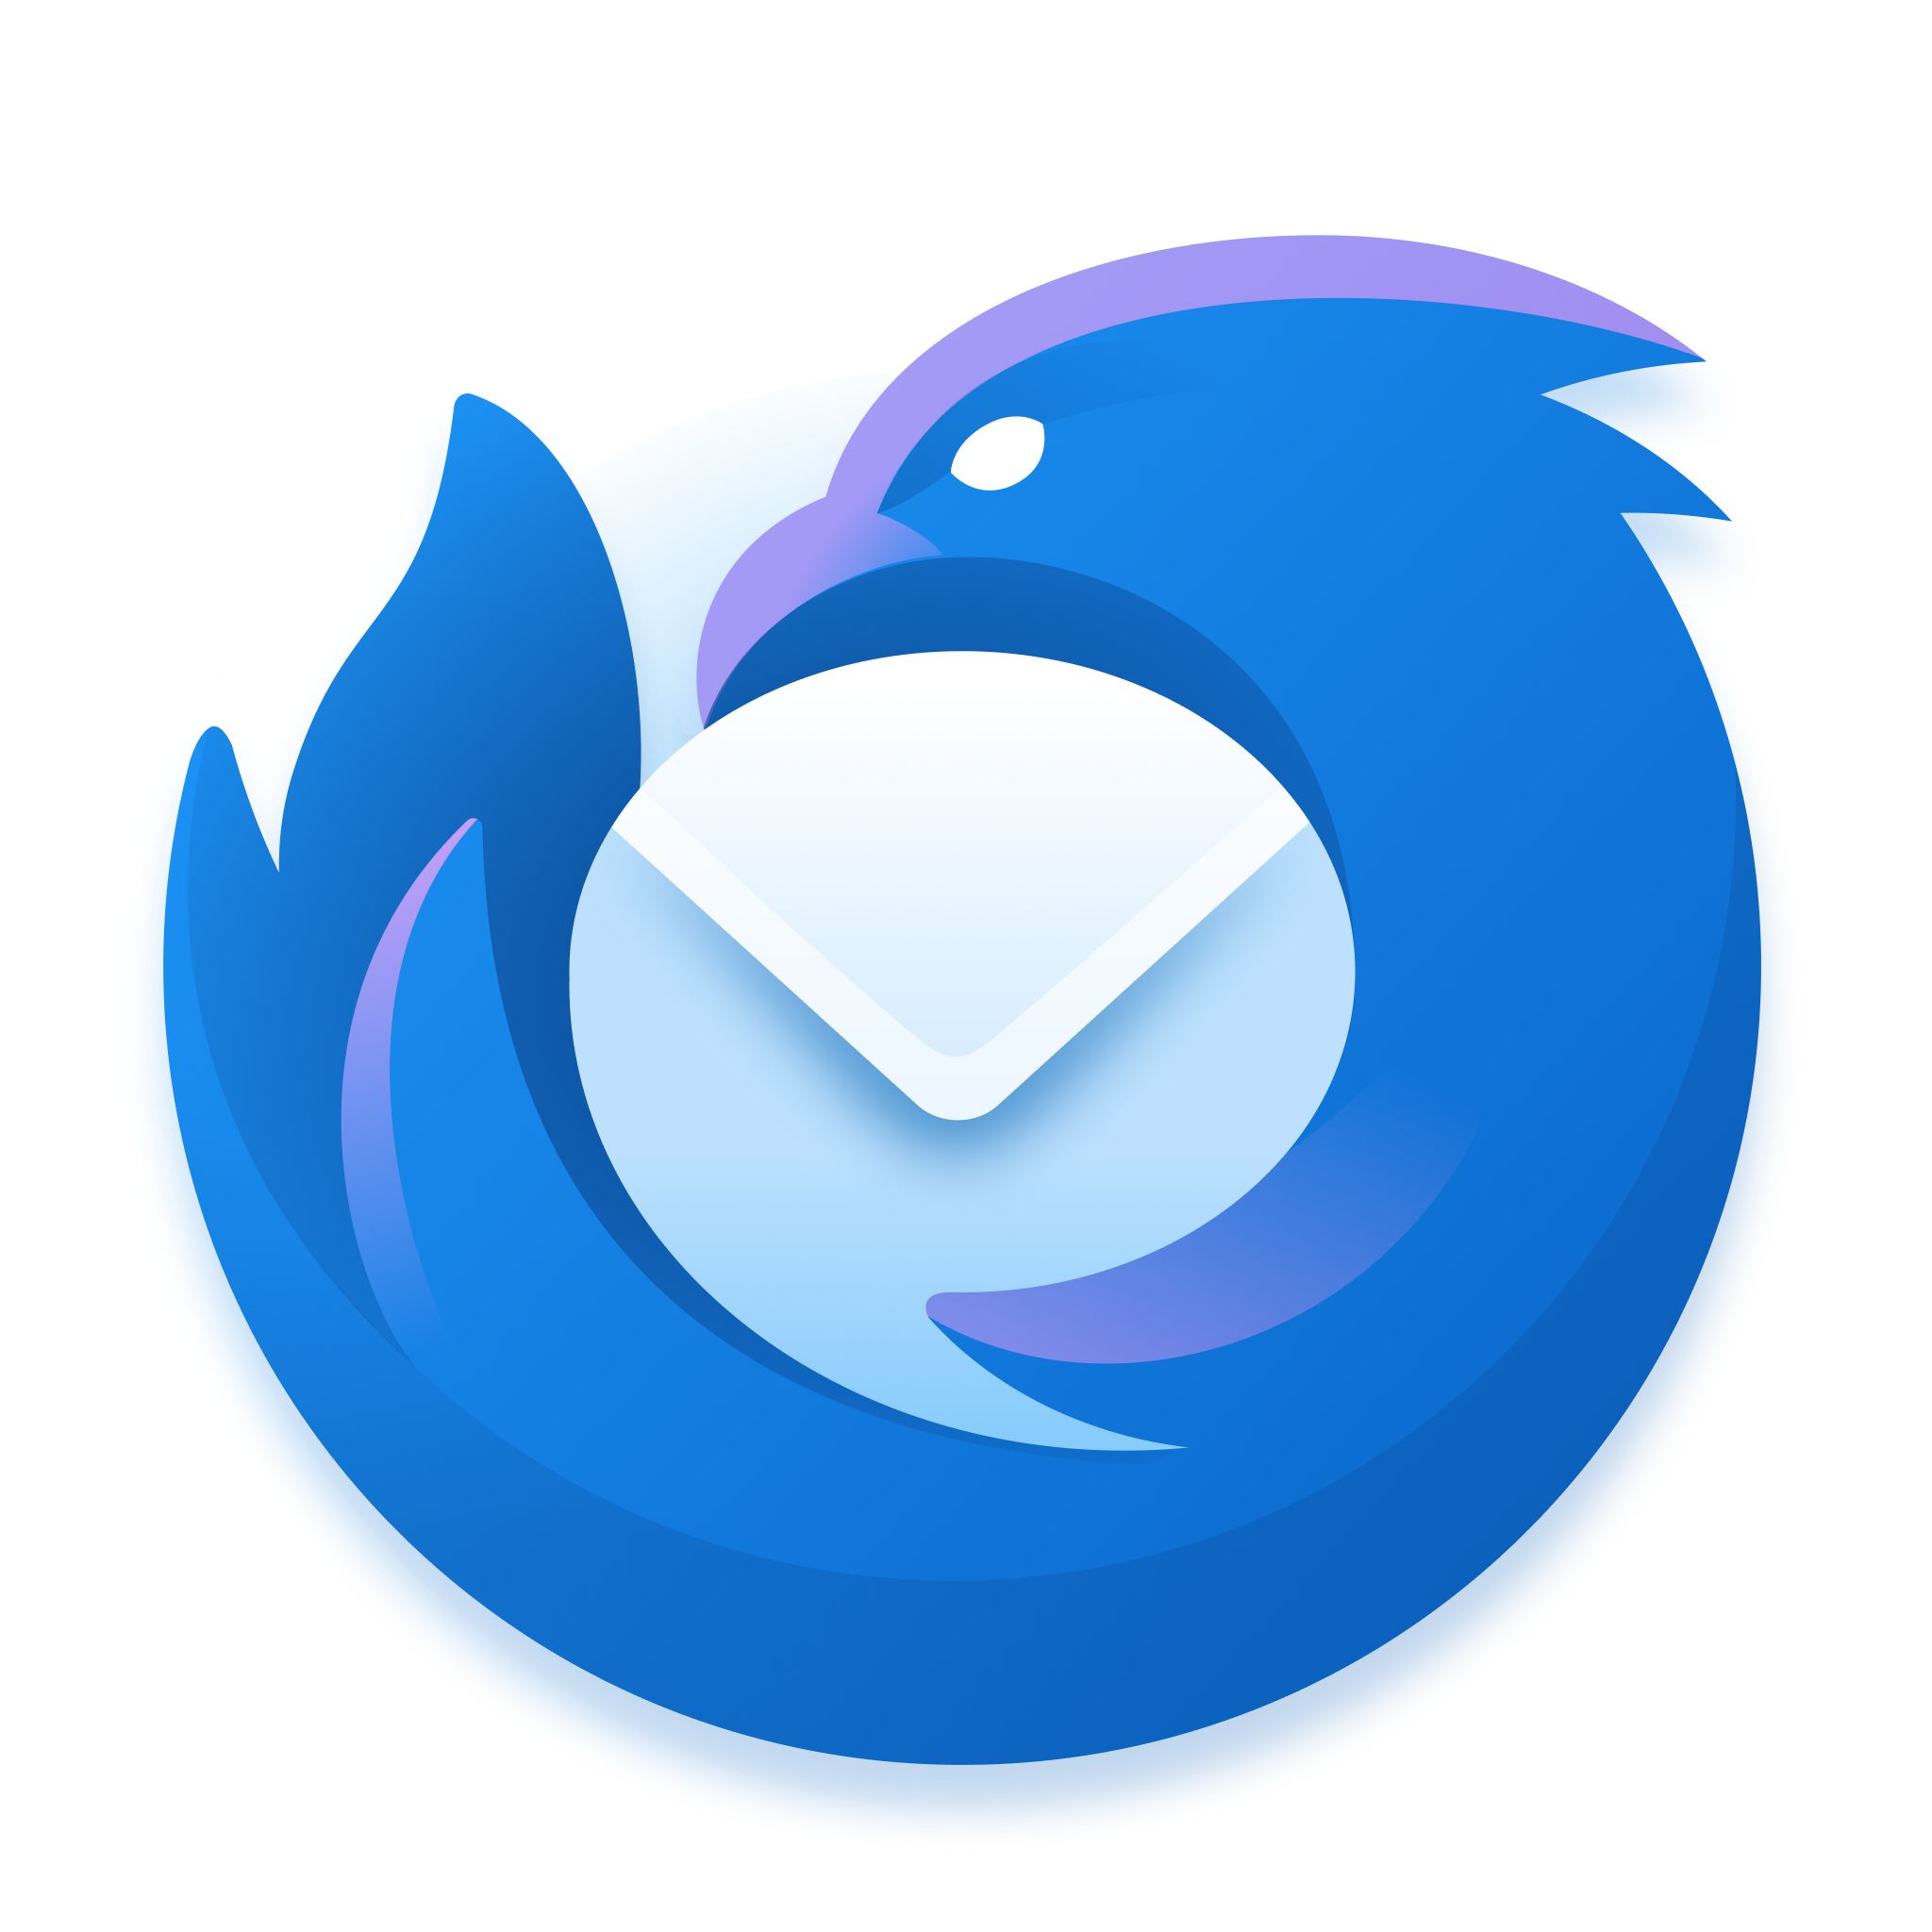 A circular app icon resembling a blue elemental bird, wrapped around and protecting a white envelope.